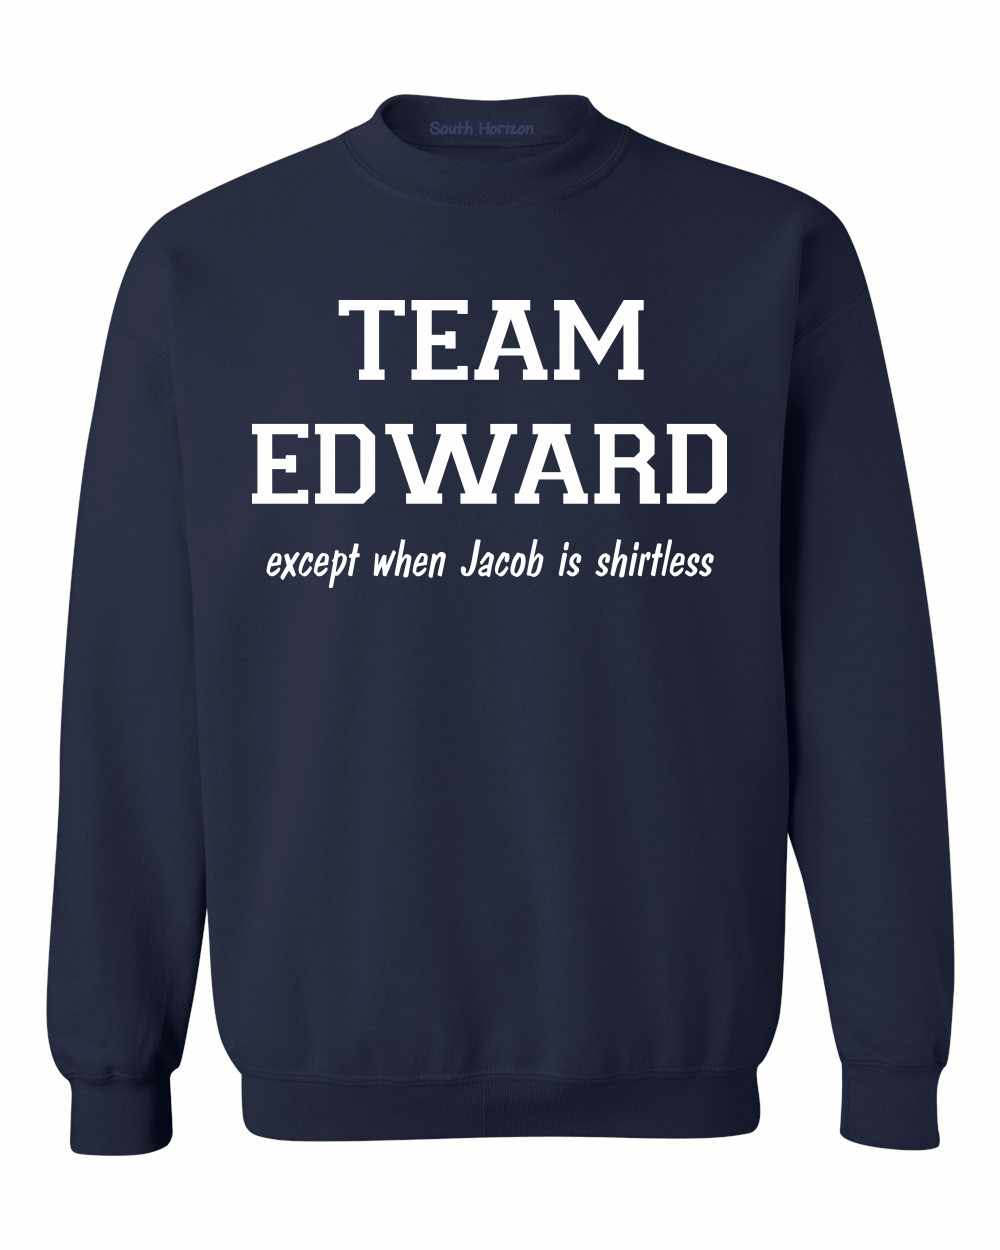 TEAM EDWARD Except when Jacob is Shirtless Sweat Shirt (#509-11)